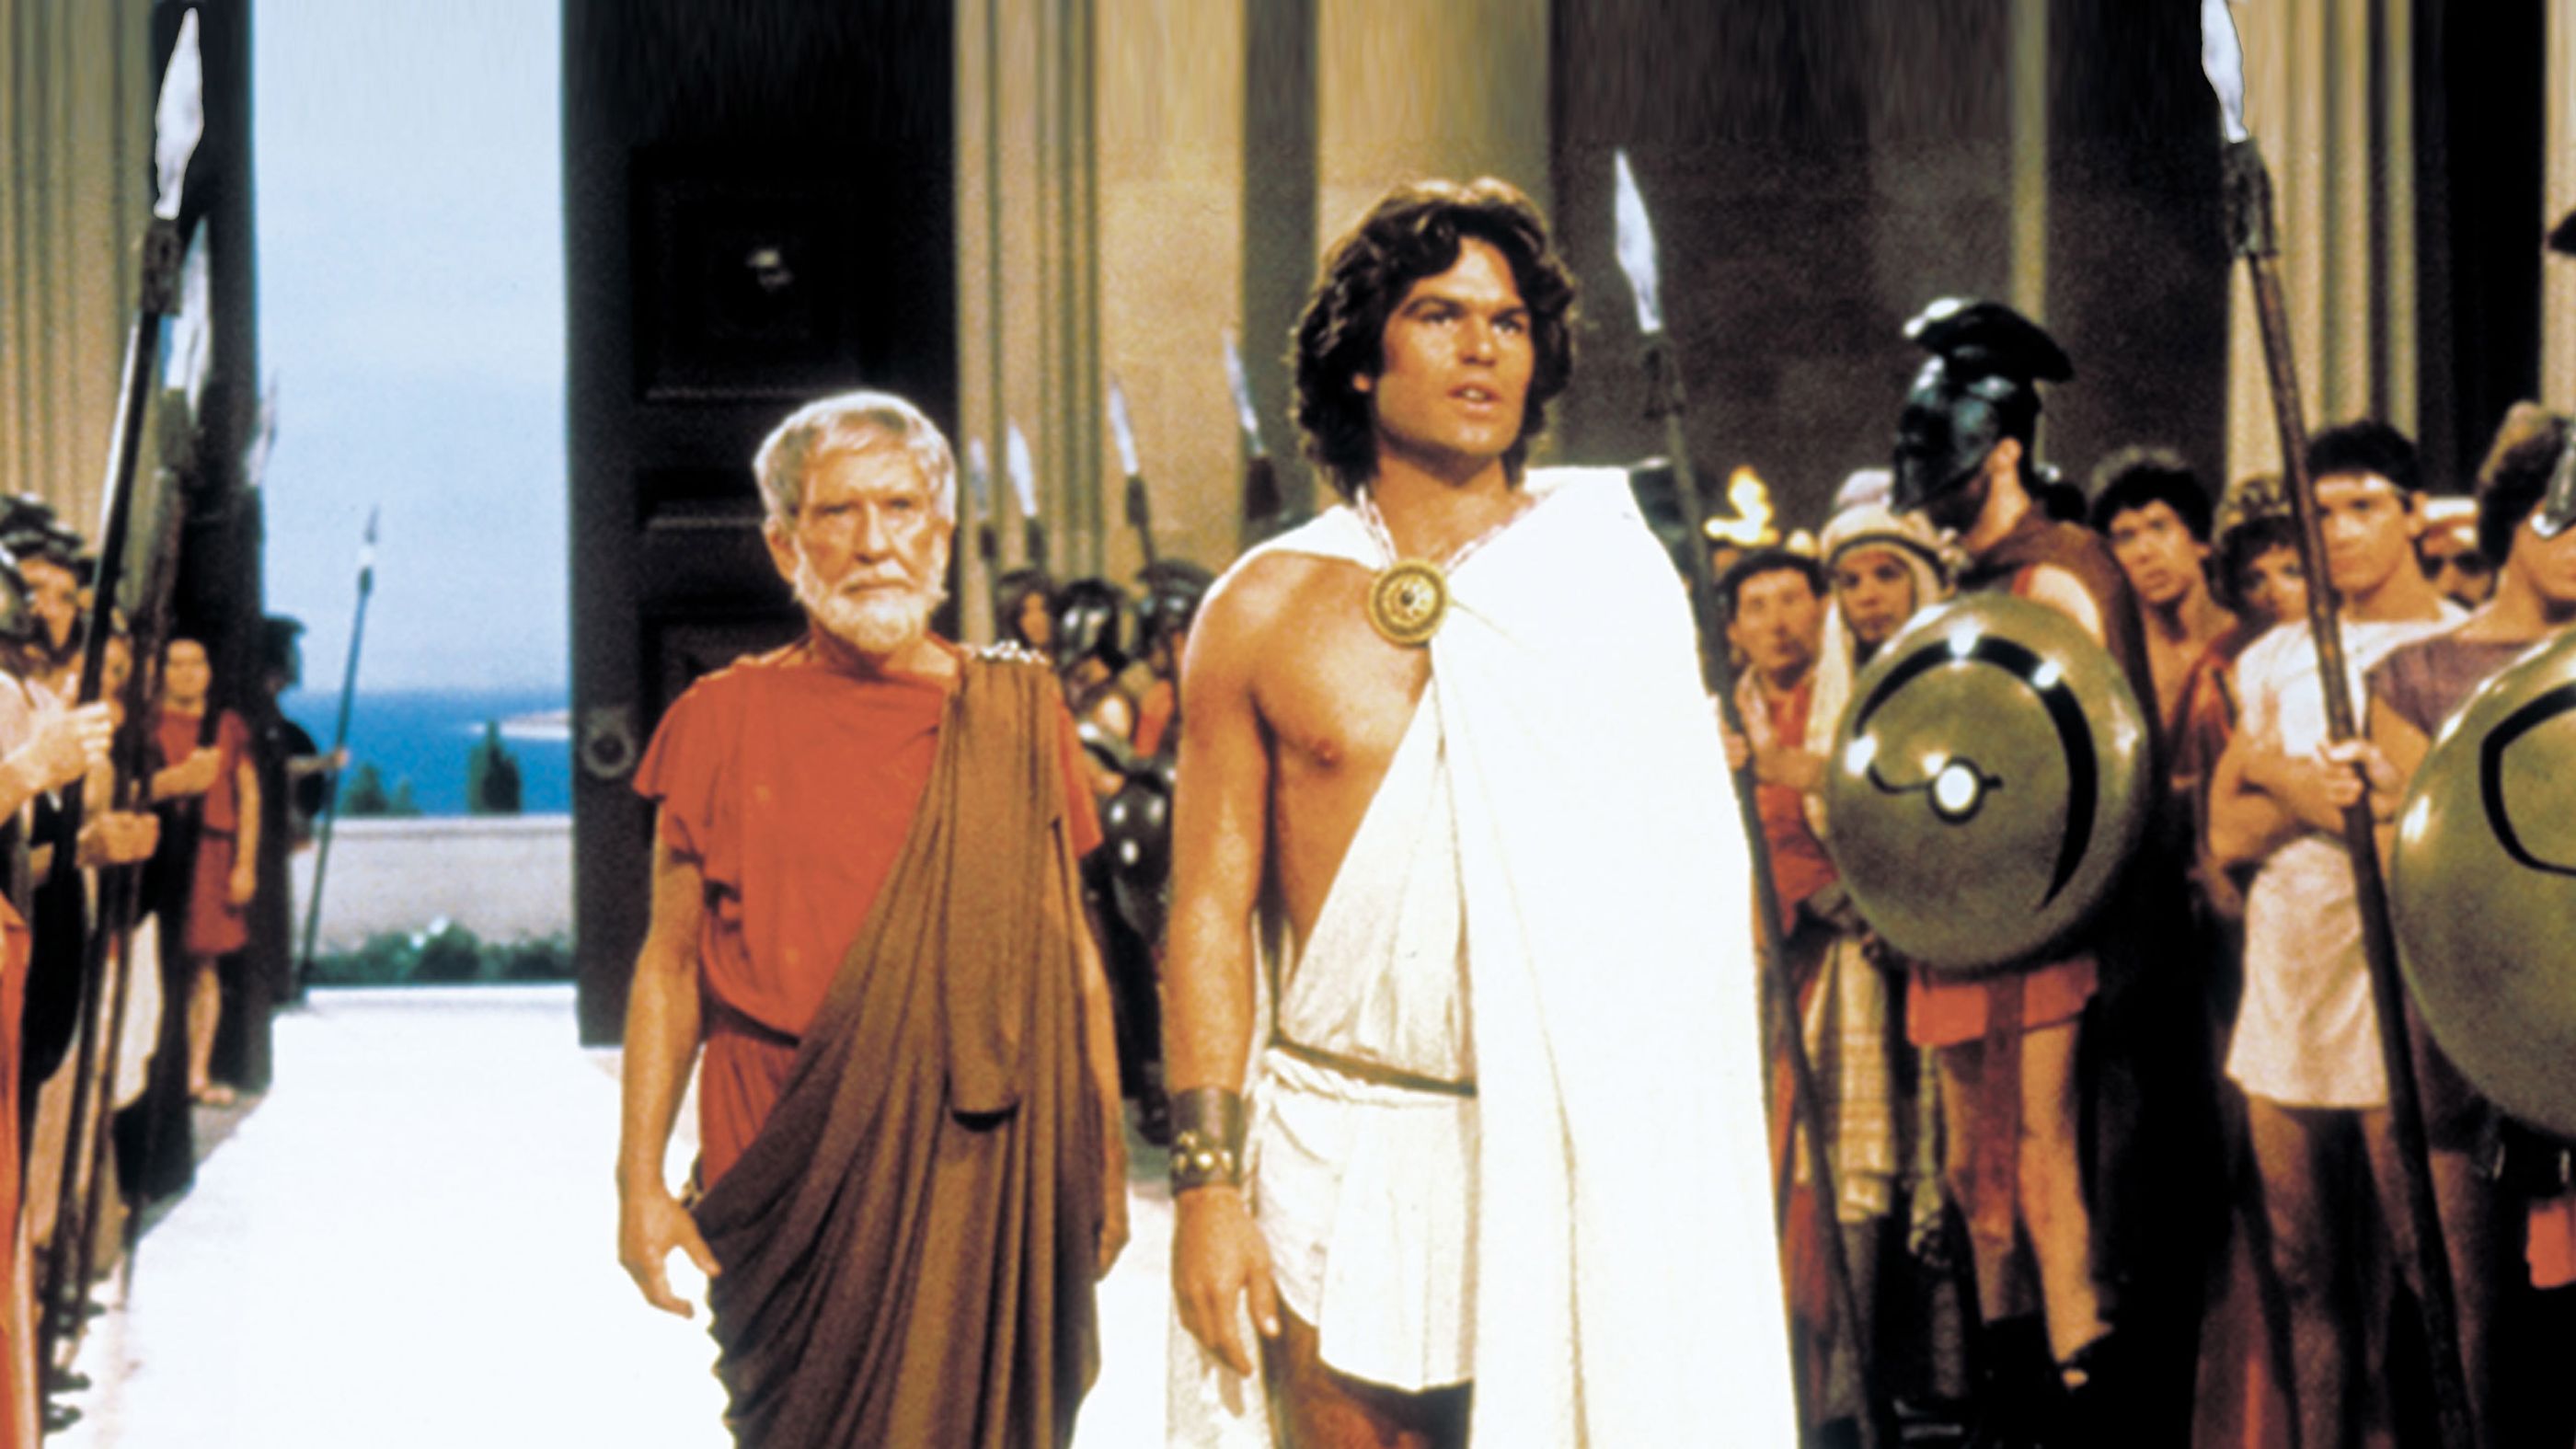 Clash of the Titans (1981) - Desmond Davis - film review and synopsis